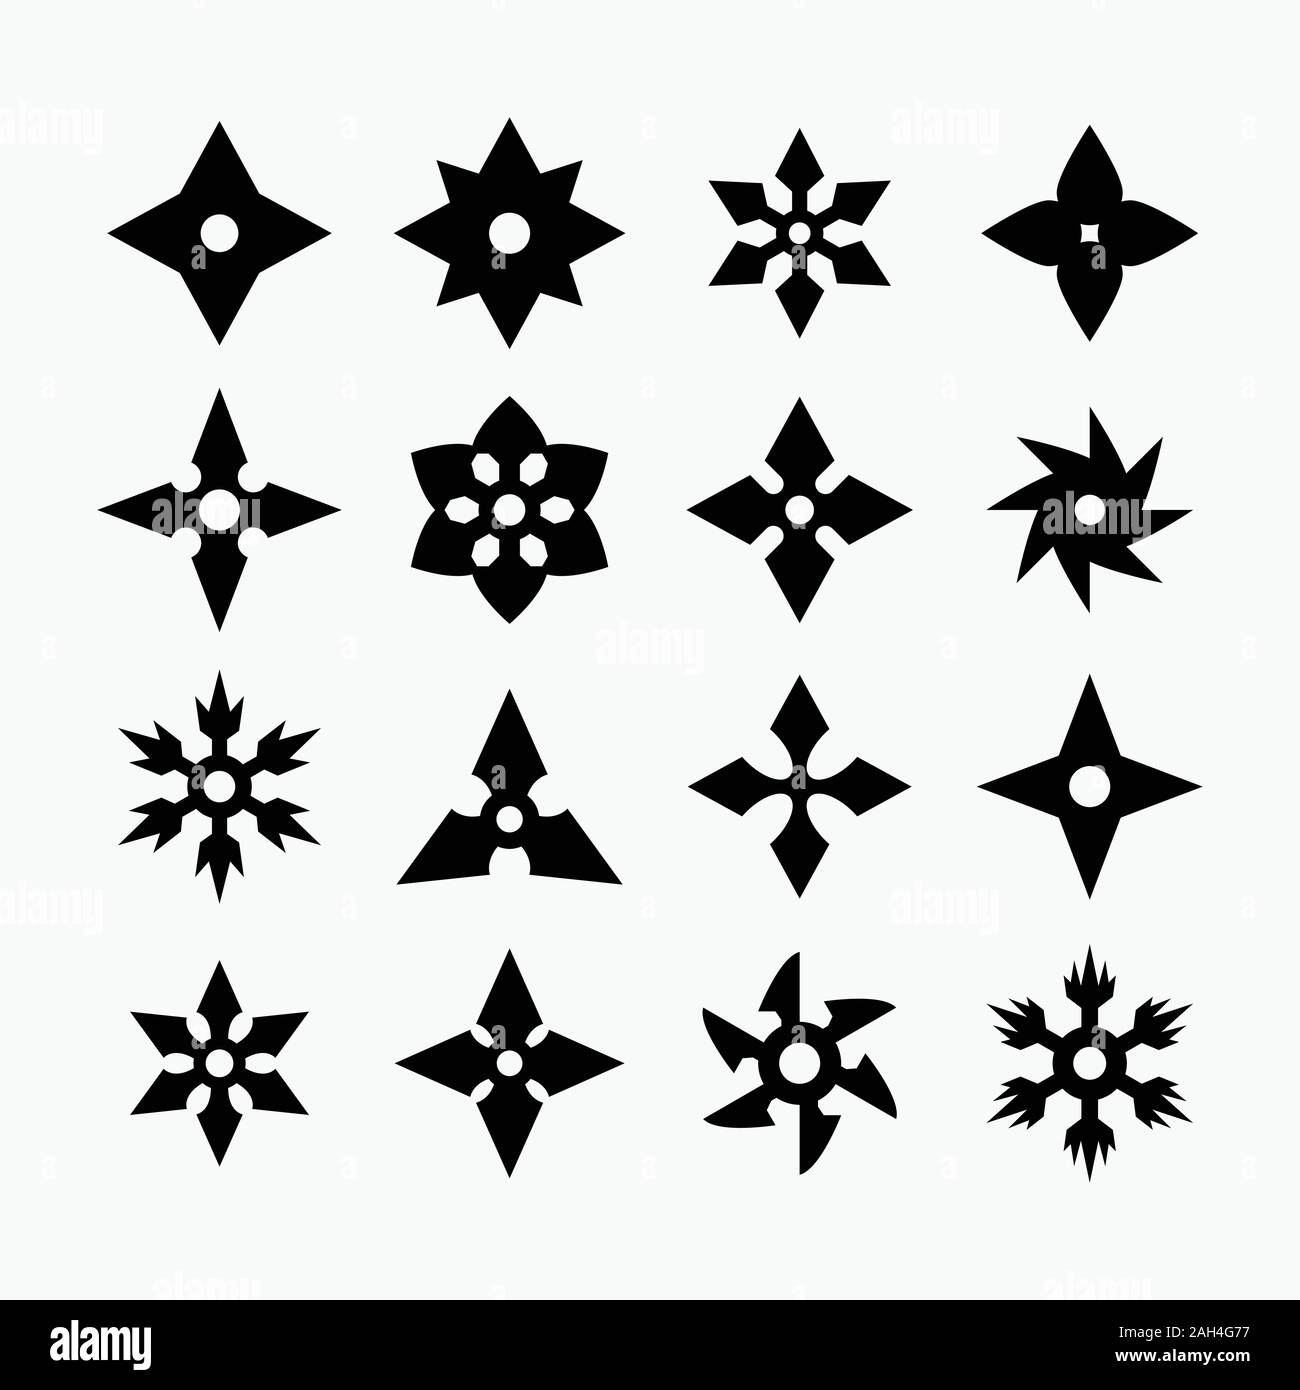 Shuriken Cut Out Stock Images & Pictures - Alamy